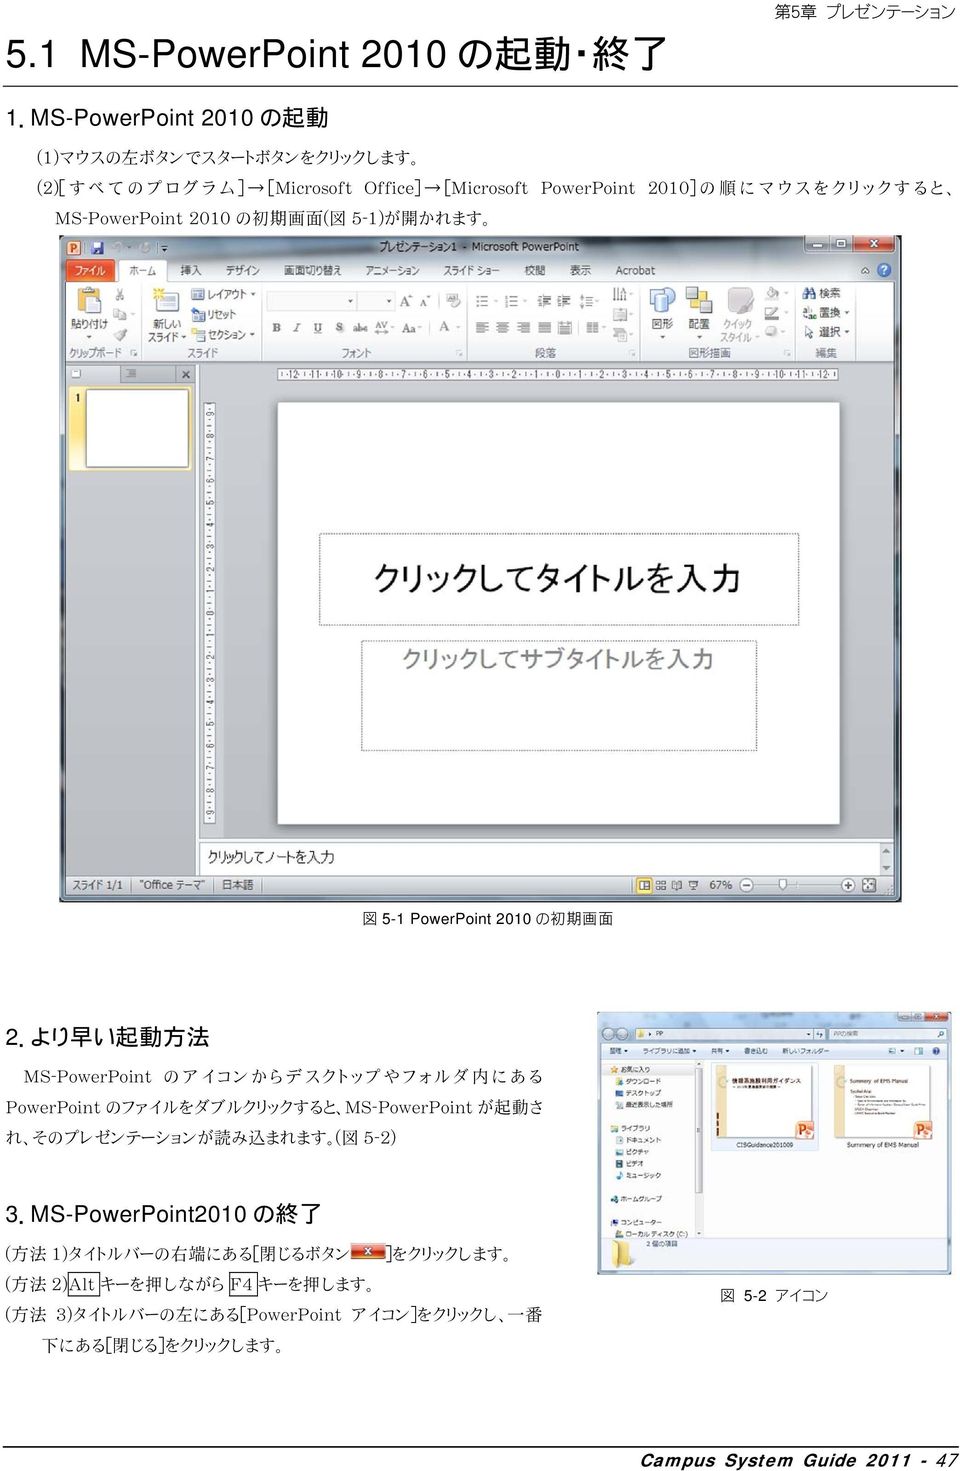 MS-PowerPoint 2010 の 初 期 画 面 ( 図 5-1)が 開 かれます 図 5-1 PowerPoint 2010 の 初 期 画 面 2.